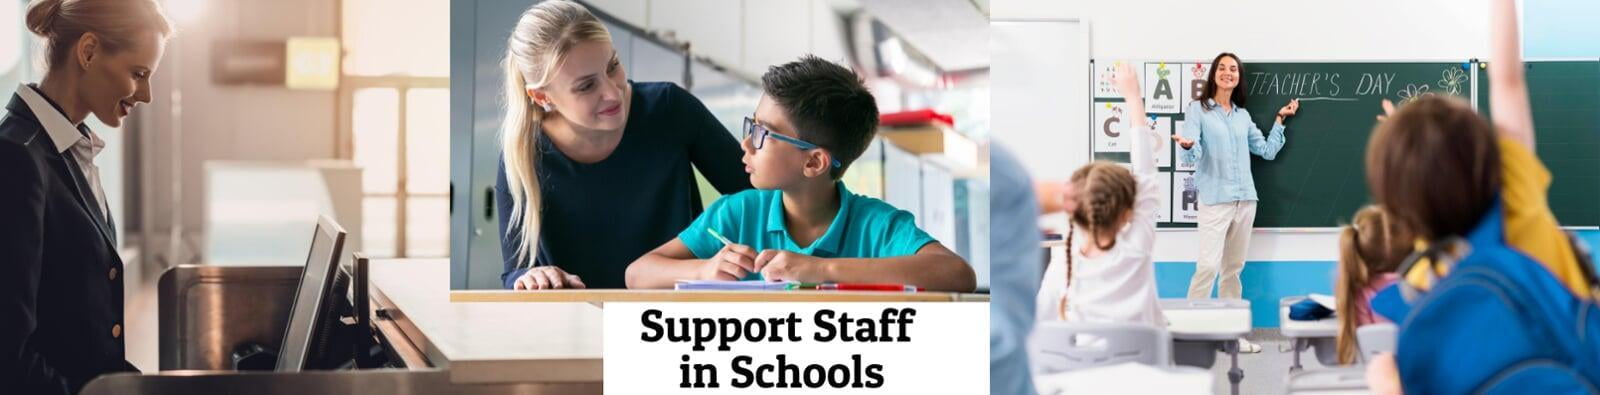 National Centre for Excellence - Support Staff at School